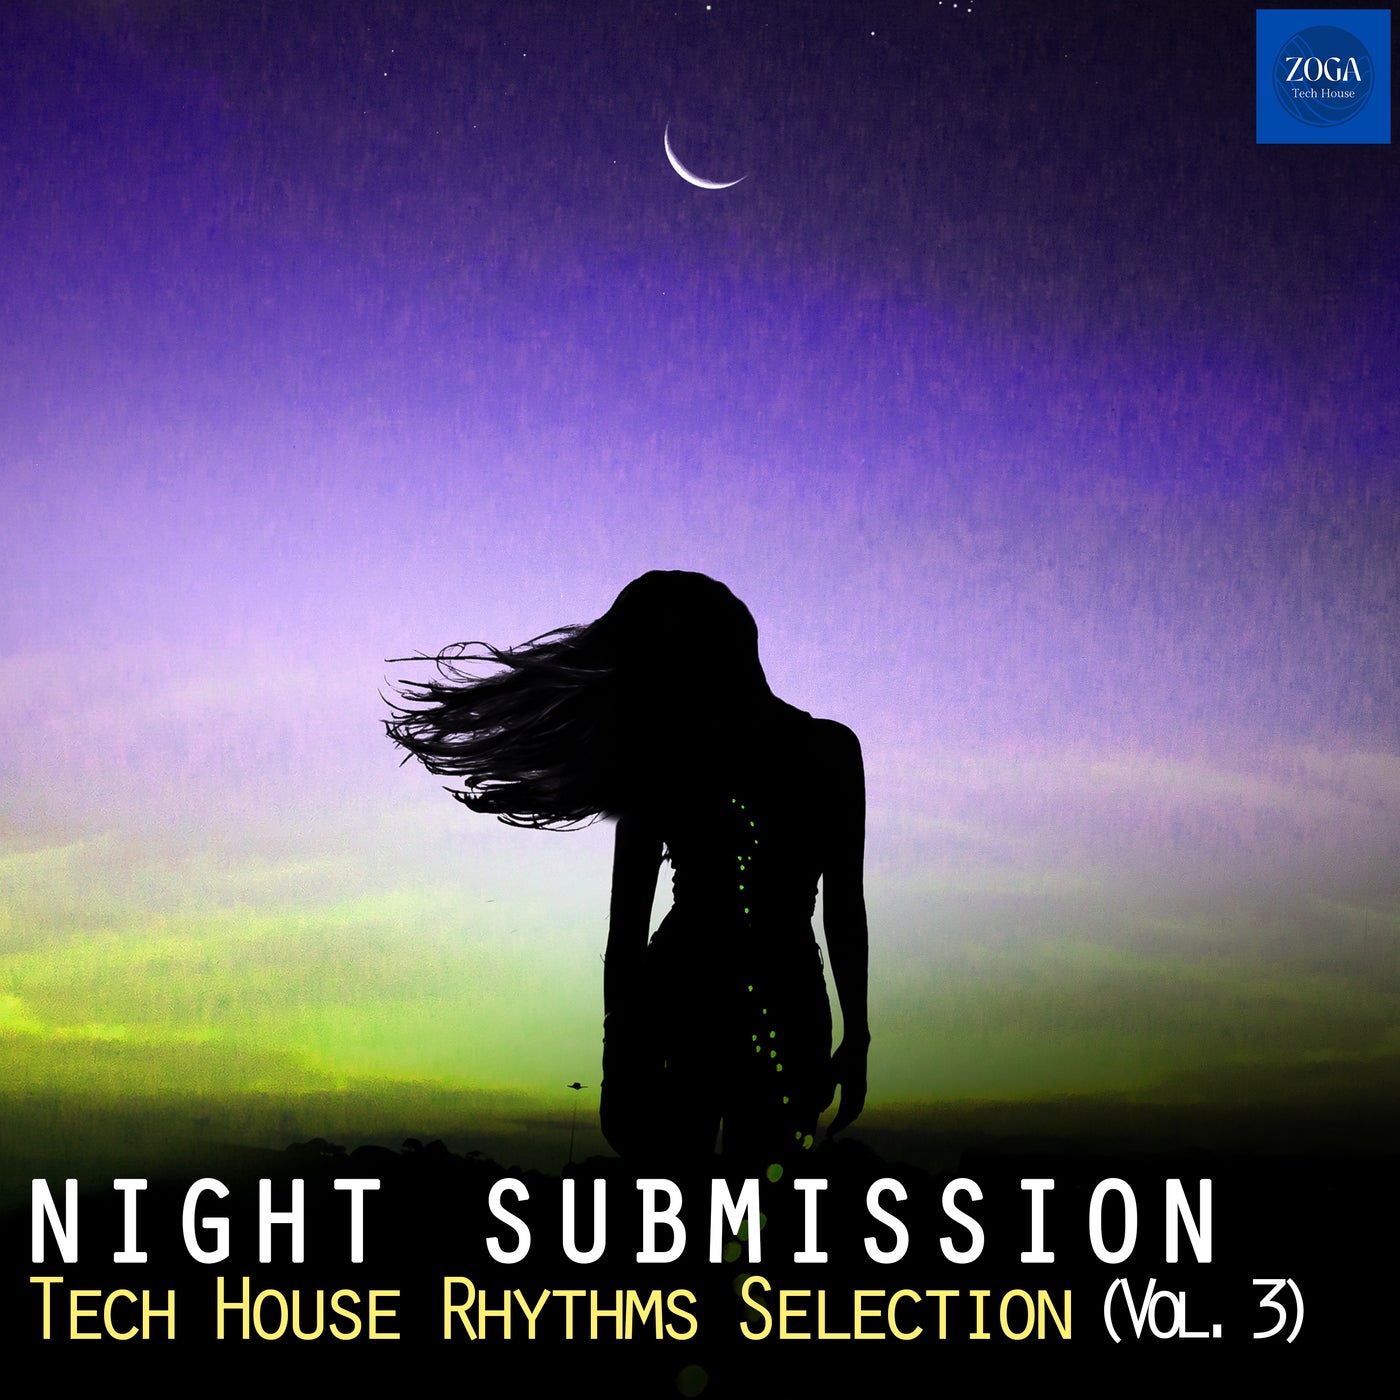 Night Submission, Vol. 3 - Tech House Rhythms Selection